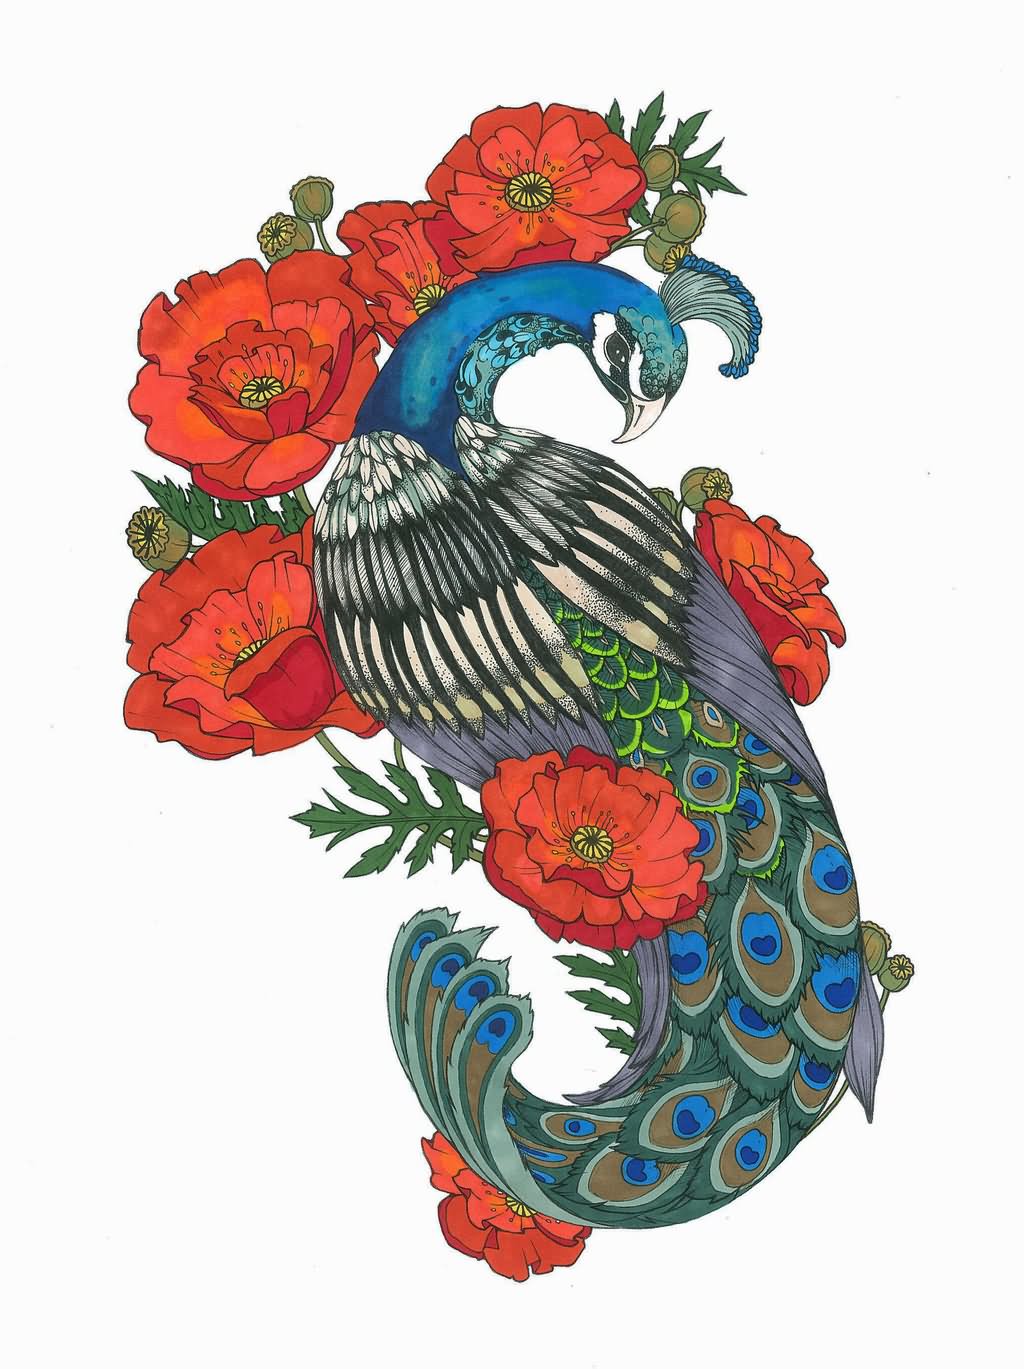 Lovely colorful peacock with red poppies tattoo design by Tegan Ray